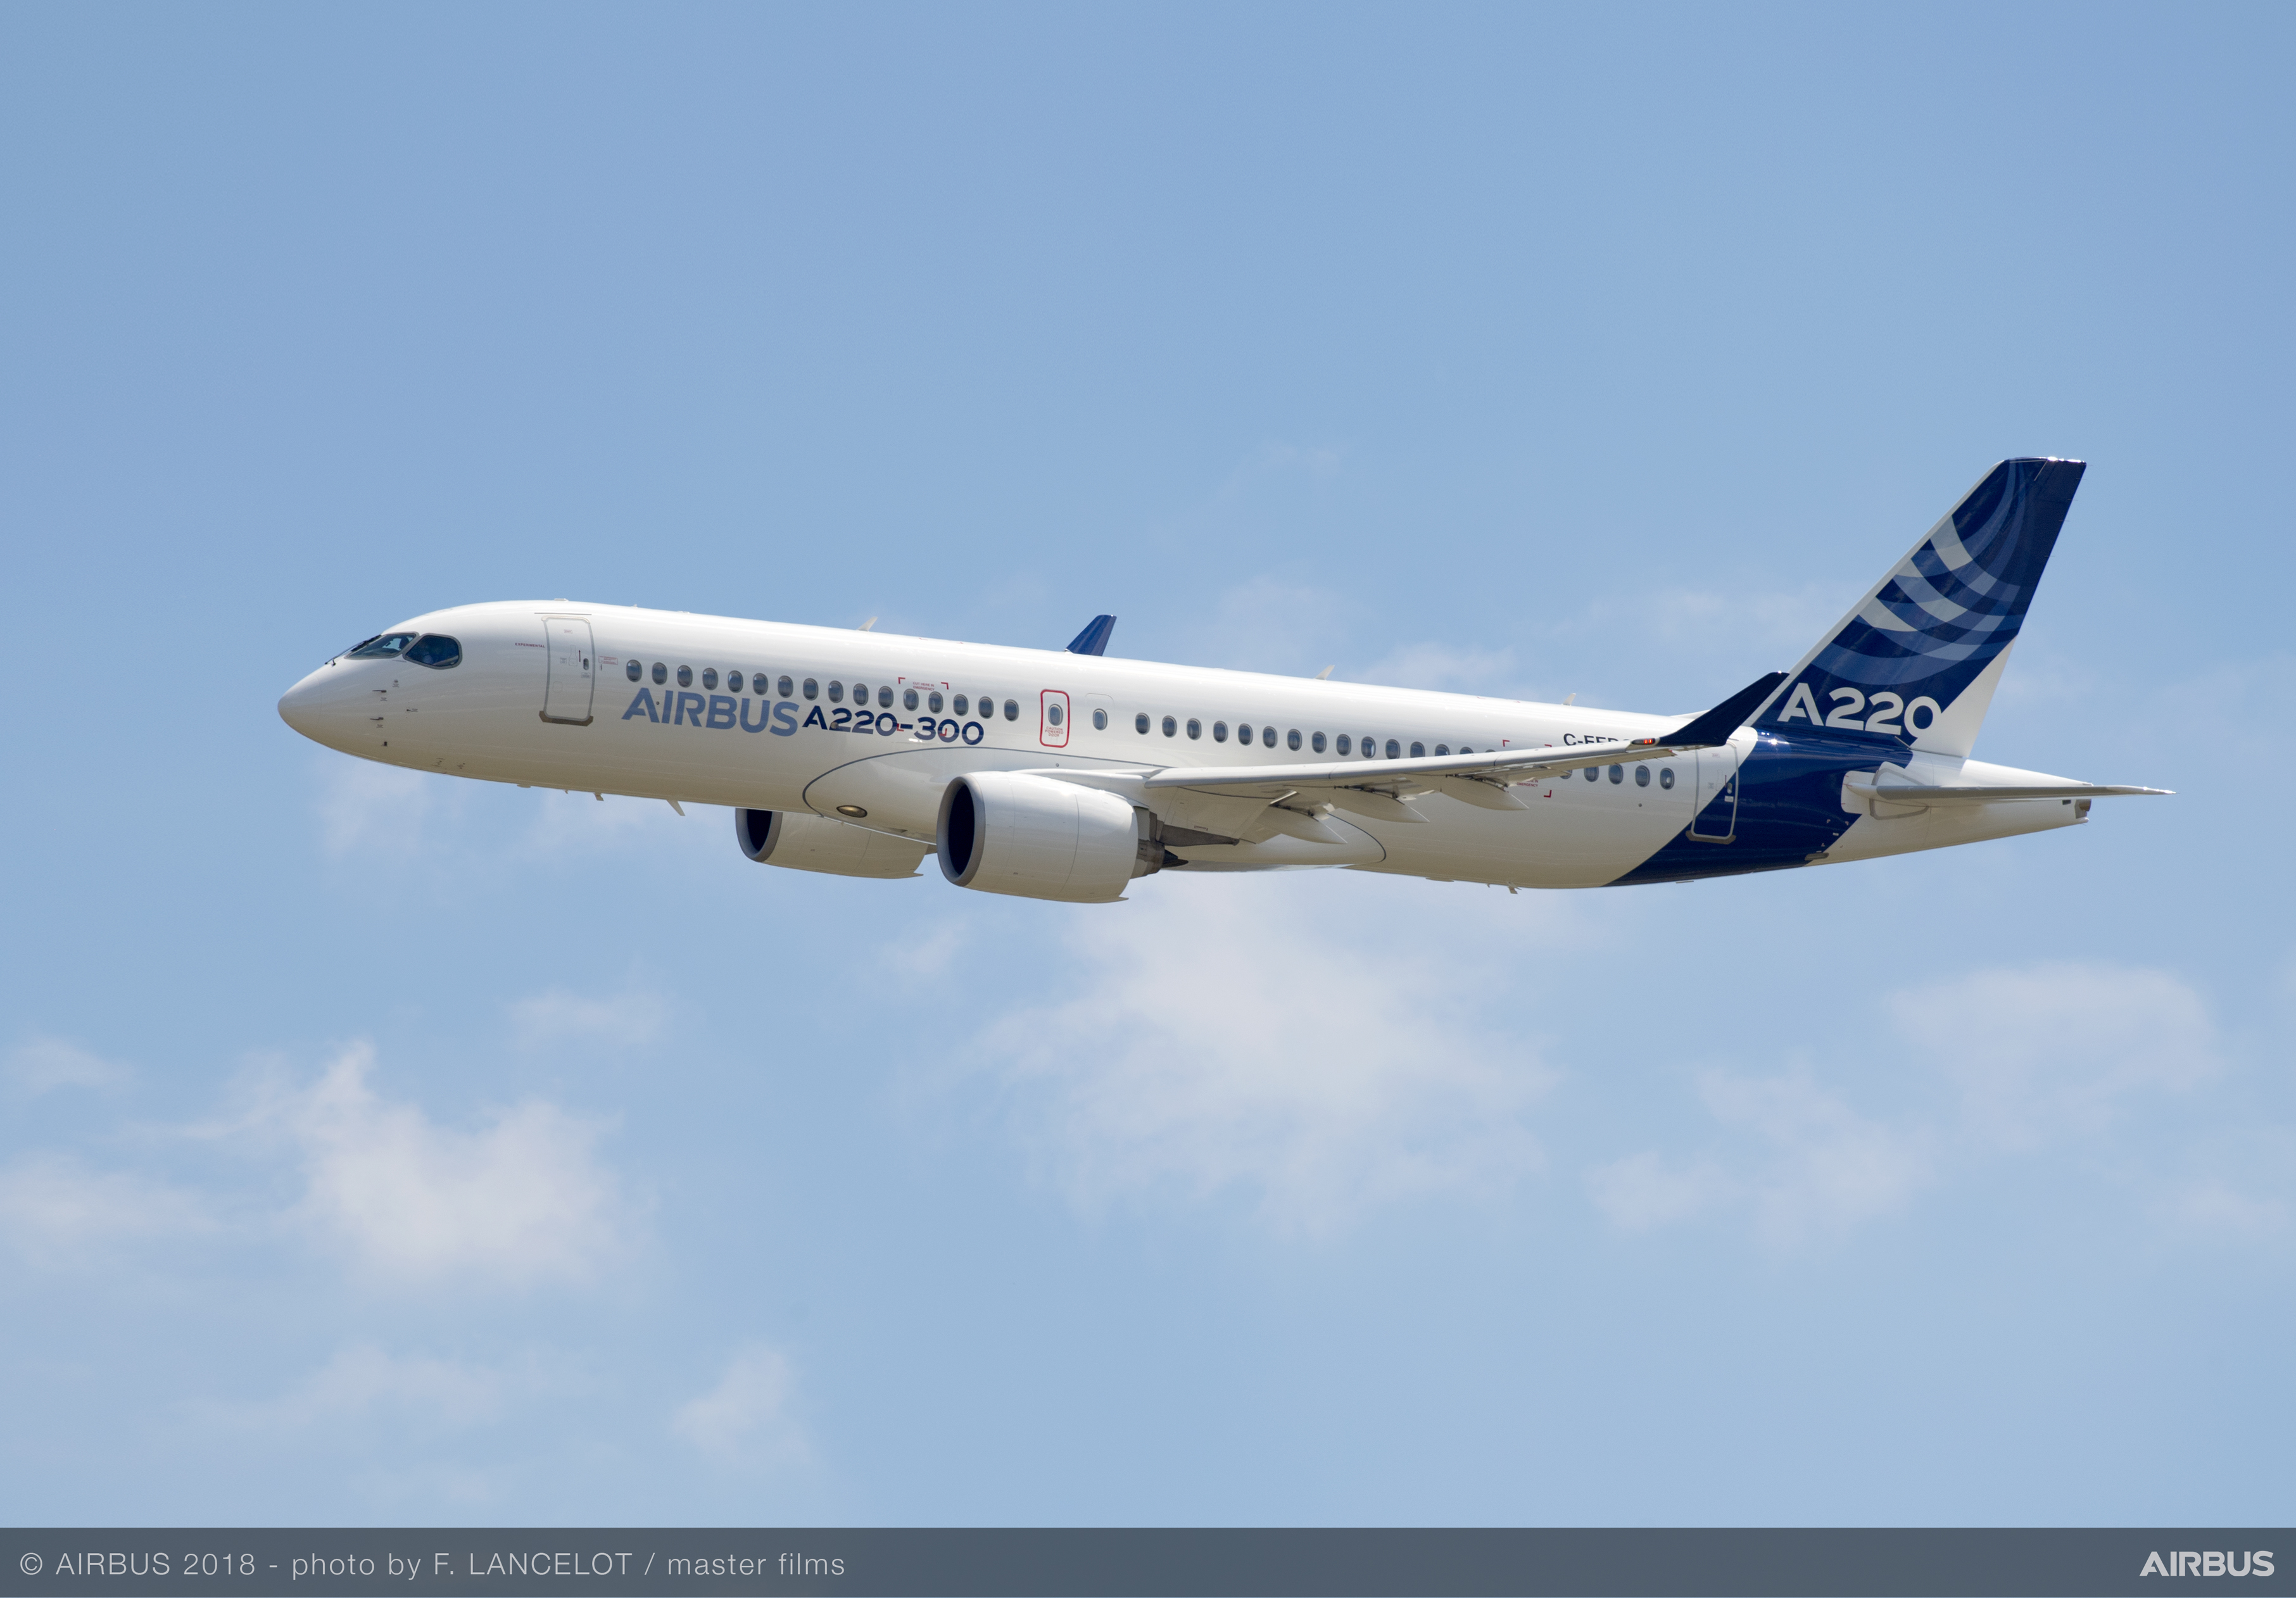 Airbus confirms production ramp up of A220